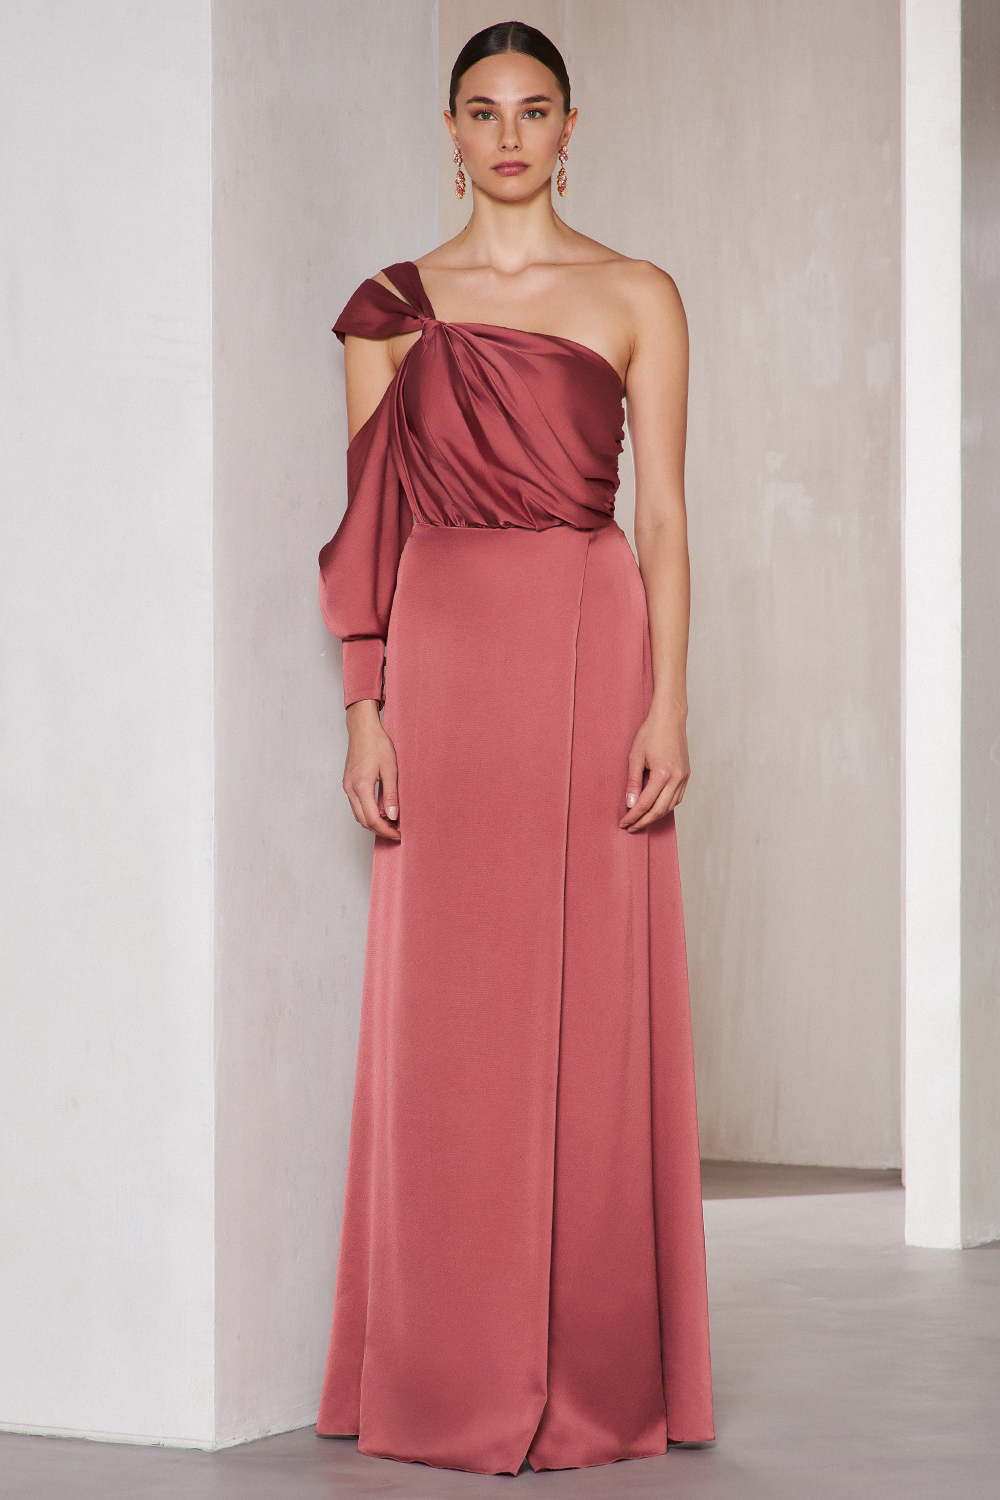 Cocktail Dresses / One shoulder long cocktail satin dress with one long sleeve